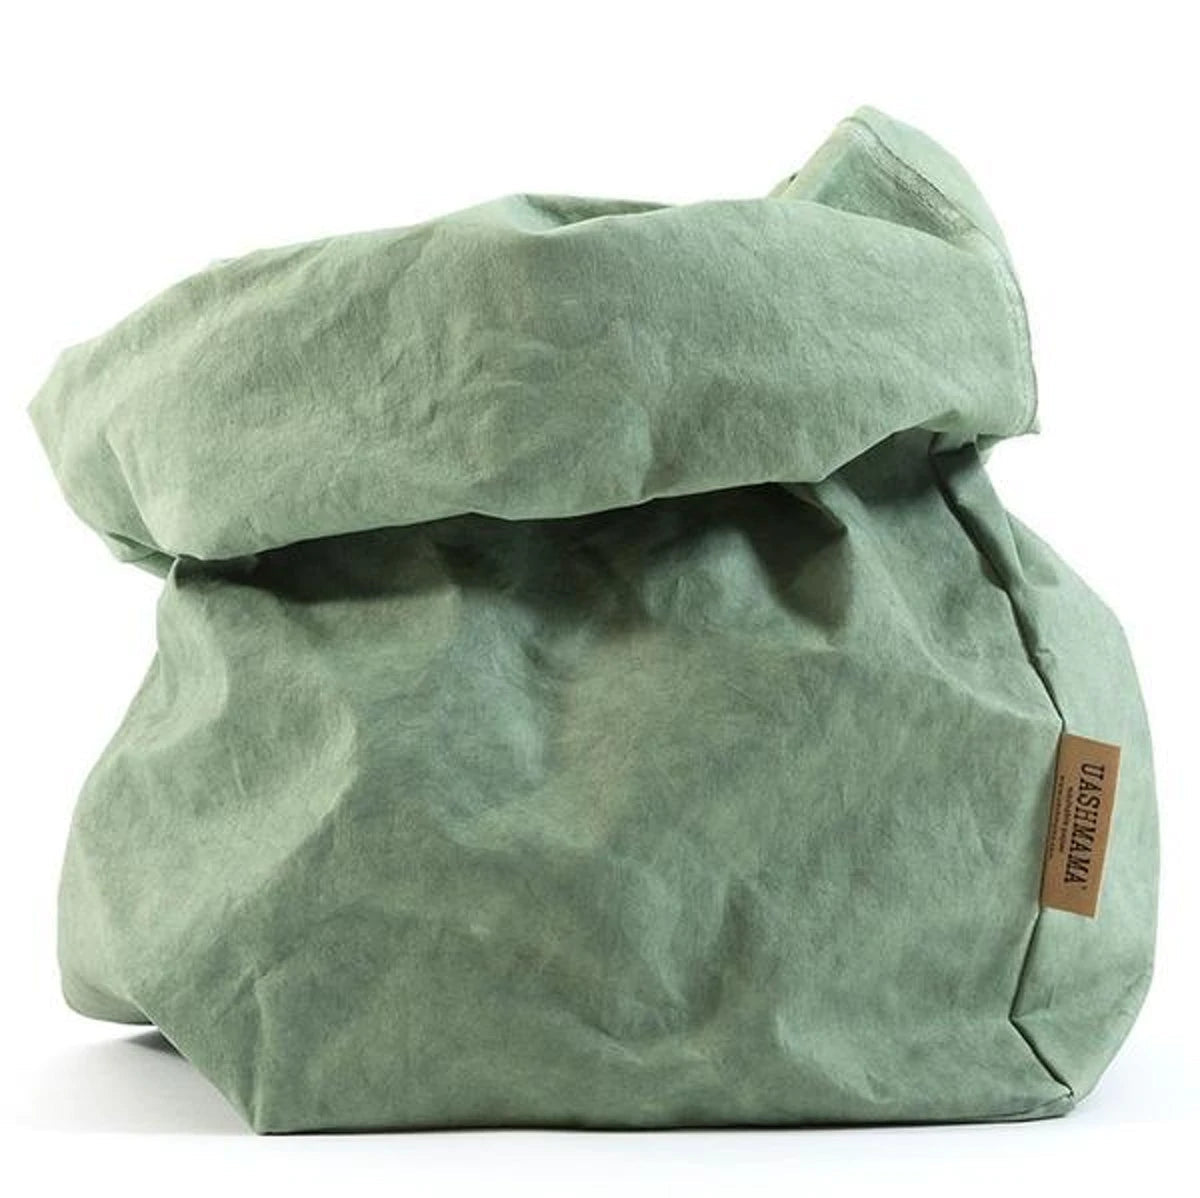 A washable paper bag is shown. The bag is rolled down at the top and features a UASHMAMA logo label on the bottom left corner. The bag pictured is the extra large size in green.